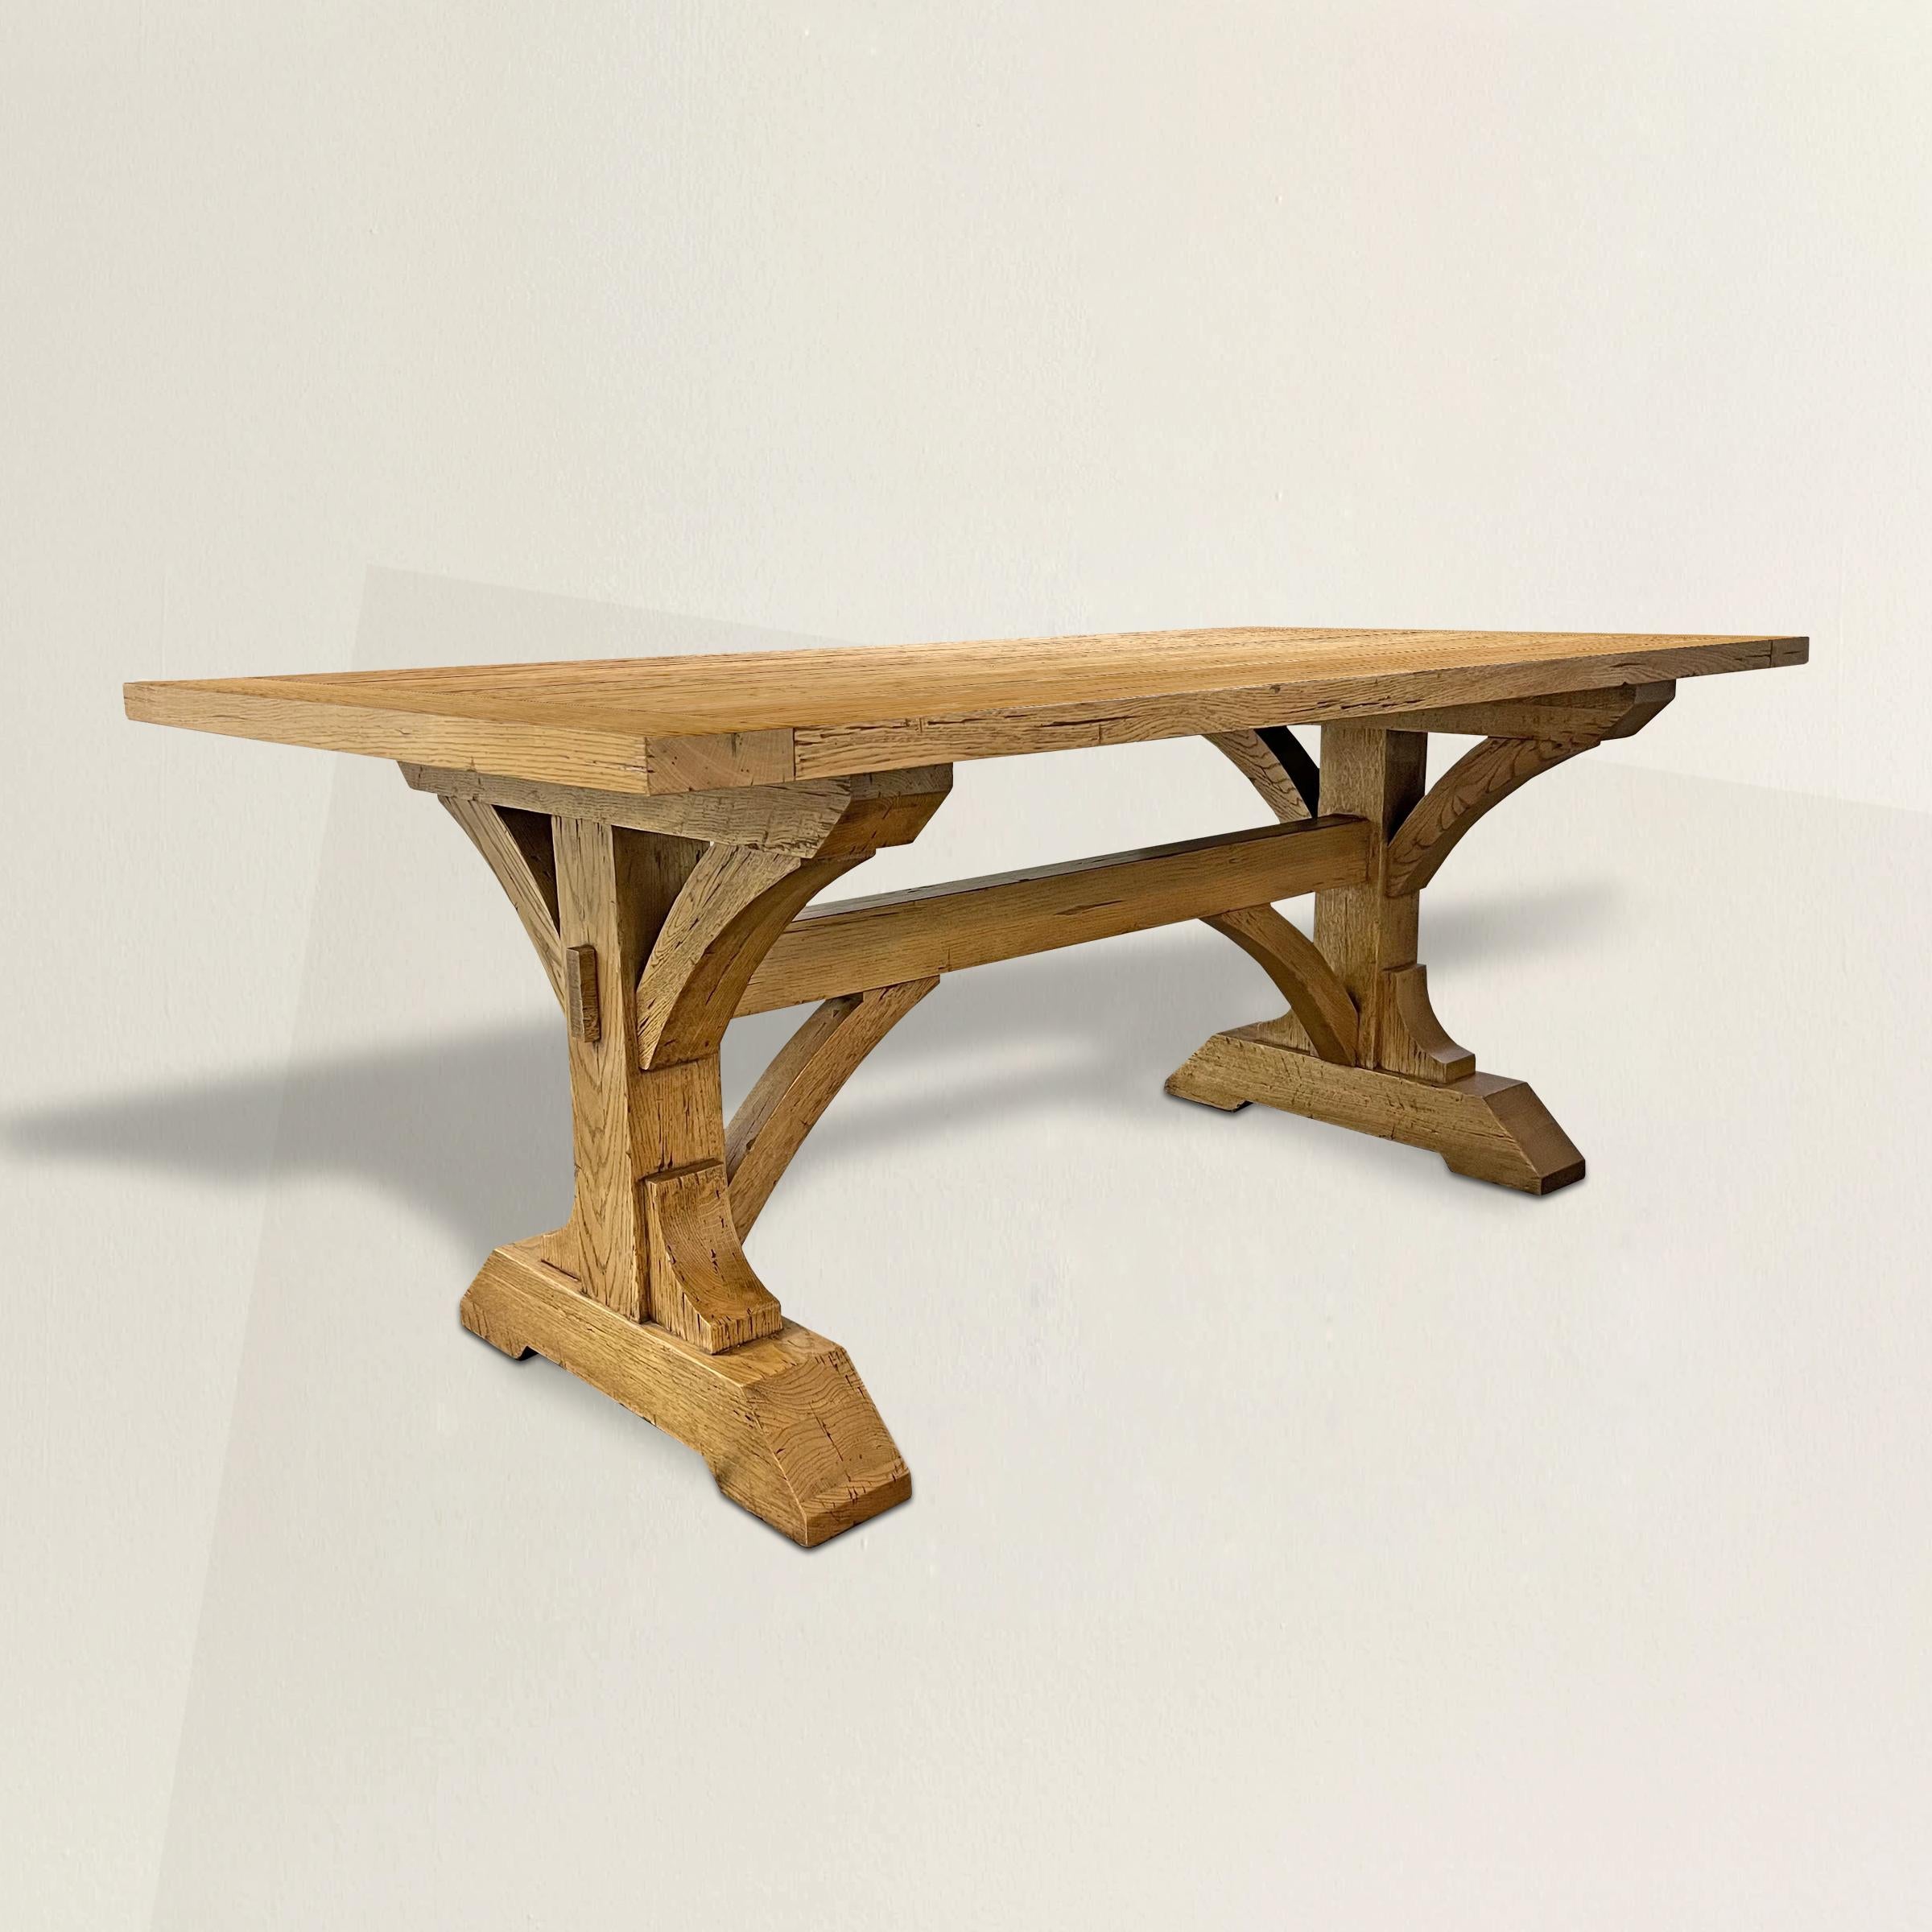 timber frame table